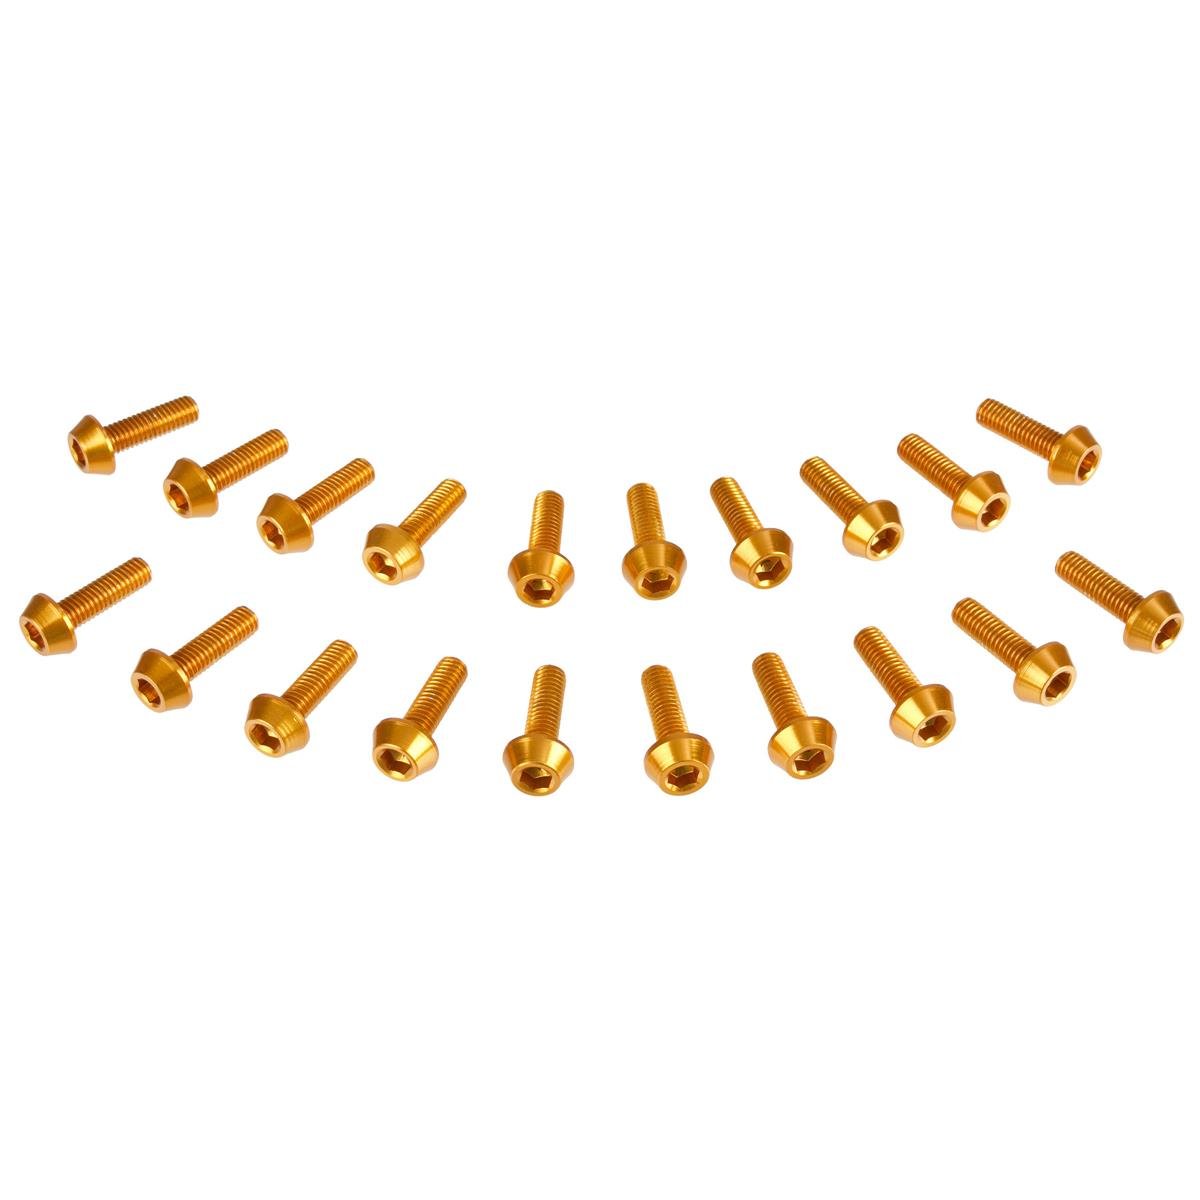 DRC Inner Hex Bolts  M6 x 20 mm, Gold, Pack of 20